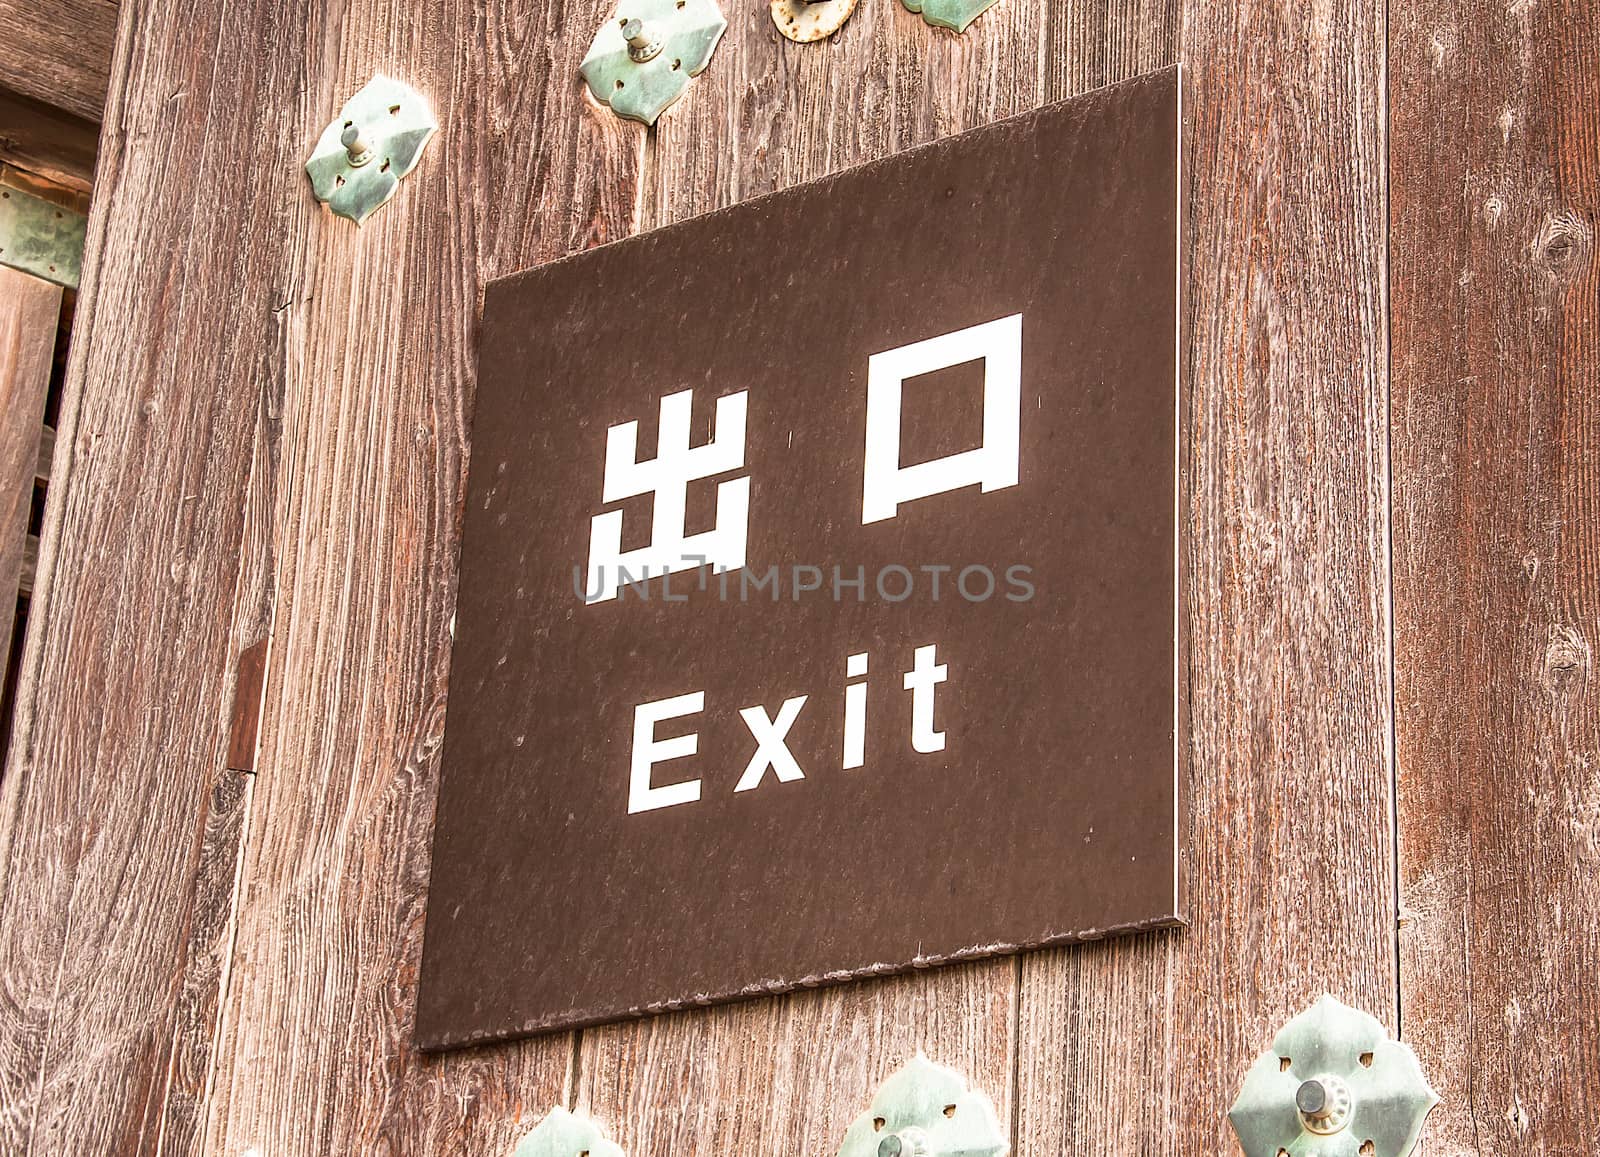 Exit sign on the brown wood walls.